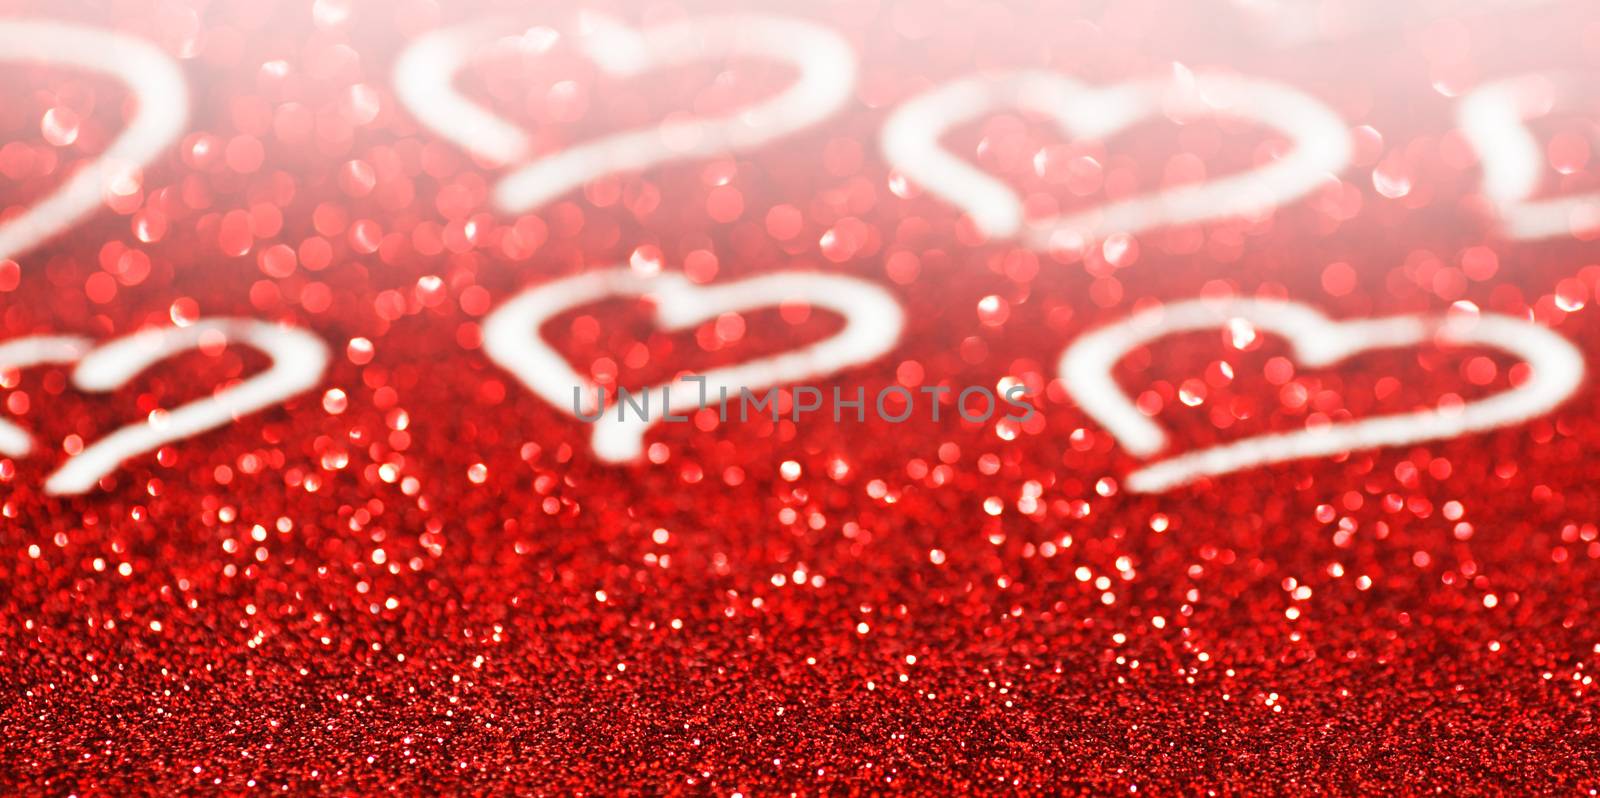 Glitter background with hearts by Yellowj